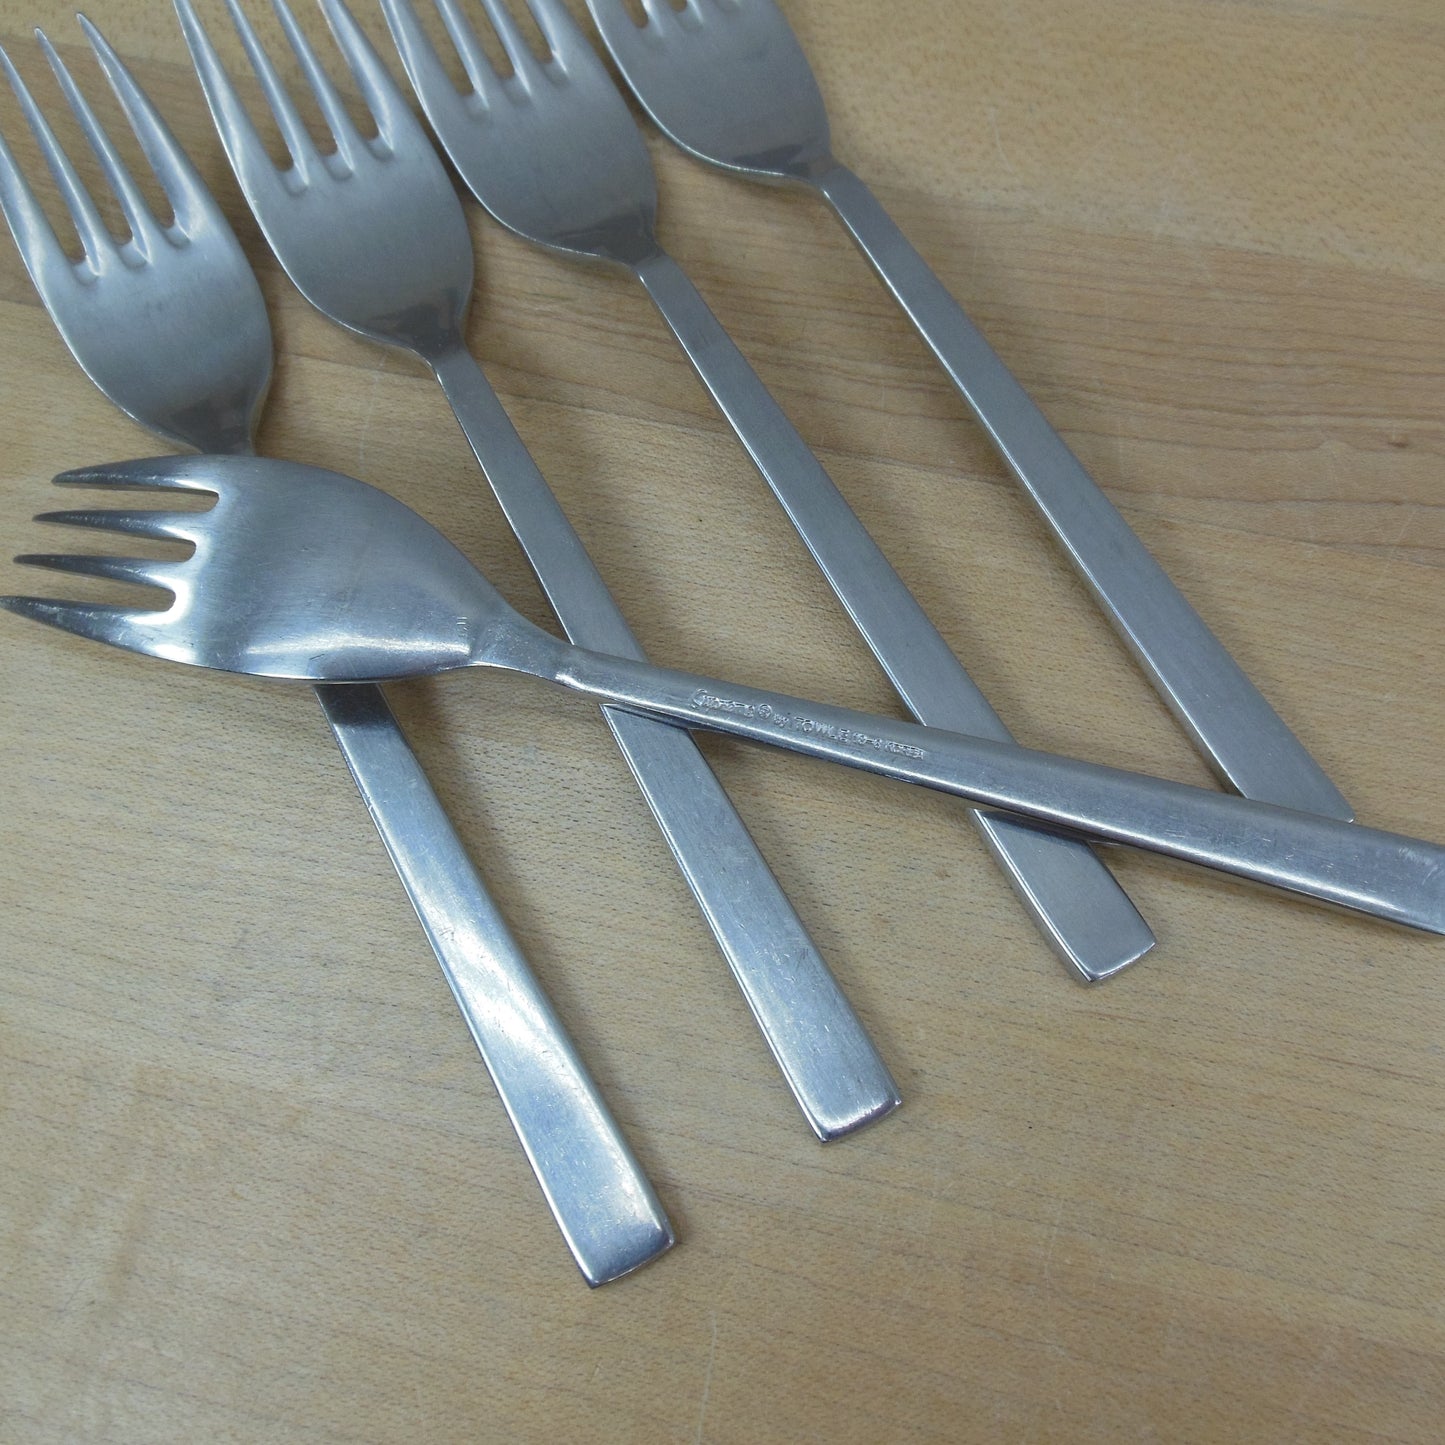 Towle Supreme Cutlery Koreas Lucerne Stainless Salad Forks - 5 Set used